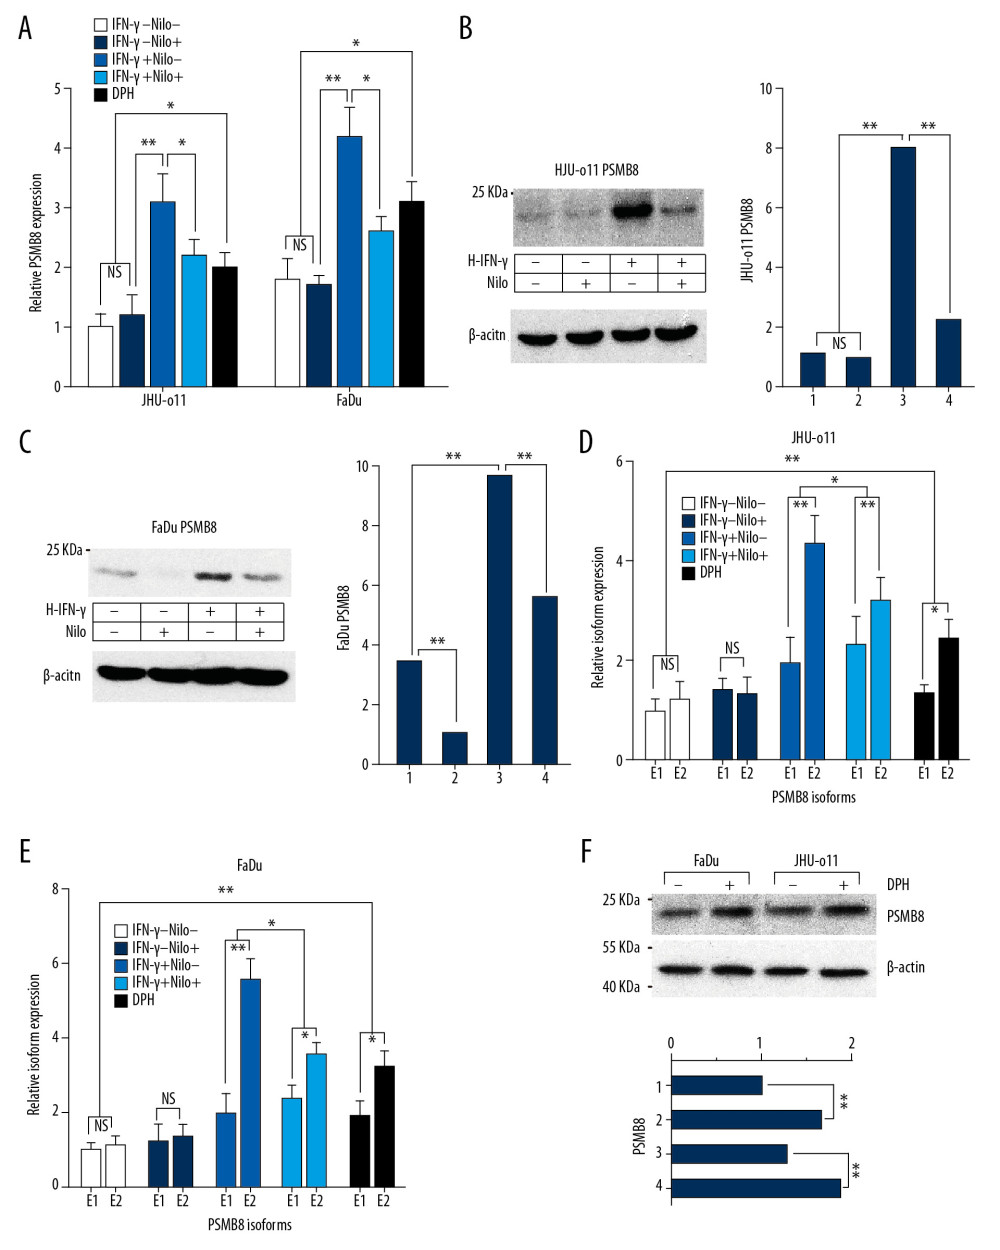 Regulation of tyrosine kinase activity on the transcription and expression levels of PSMB8 and its alternatively spliced isoforms (A) JHU-011 cells and FaDu cells were divided into 5 groups. In the IFN-γ+/Nilo+ group, nilotinib was first added and the cells were incubated for 24 h. Then IFN-γ was added and the cells were cultured for another 24 h. In the IFN-γ+/Nilo− group, the transcription level of PSMB8 was significantly upregulated compared to that in the control group (IFN-γ−/Nilo− group) (** P<0.01), while the transcription of PSMB8 in the IFN-γ−/Nilo+ group was inhibited (* P<0.05). (B) The protein expression of PSMB8 in the IFN-γ+/Nilo+ group was downregulated compared to that in the IFN-γ+/Nilo− group in FaDu cells (** P<0.01). (C) The protein expression of PSMB8 in the IFN-γ+/Nilo+ group was downregulated in JHU-011 cells (** P<0.01). (D) Nilotinib downregulated the induction effect of IFN-γ on isoform E2, and the percentage of isoform E2 was reduced (* P<0.05). In the DPH+ group, the transcription level of isoform E2 was higher than that in the control group (IFN-γ−/Nilo− group) (** P<0.01). Quantitative data are expressed as the mean±SD. (E) In FaDu cells, the regulation of nilotinib on the transcription of E2 was consistent with the results in JHU-011 cells (* P<0.05). (F) In the DPH+ group, protein expression of PSMB8 in JHU-011 cells and FaDu cells was elevated compared to that in the blank control group (** P<0.01). Each group contained 3 independent replicates.